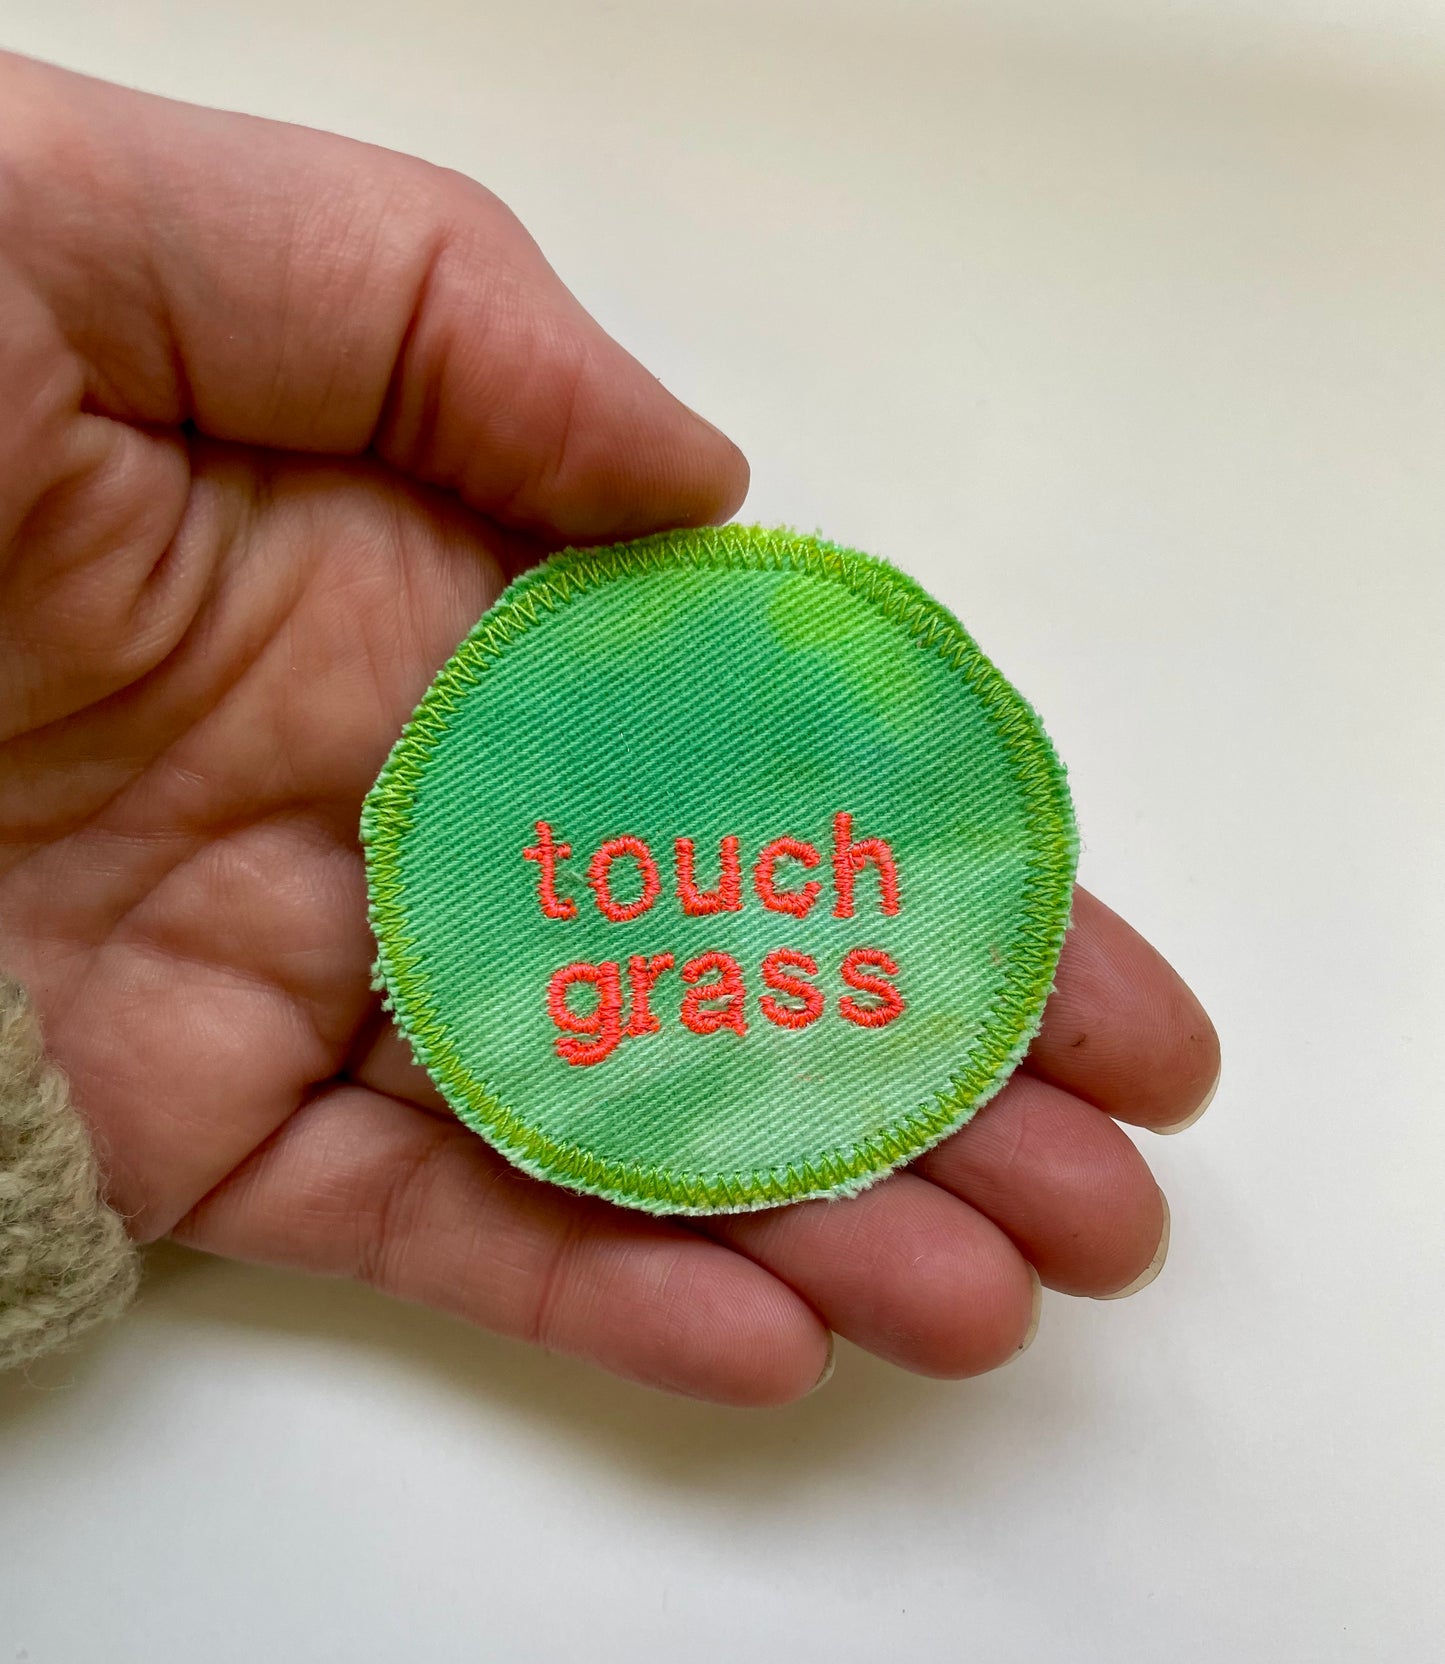 Touch Grass. Handmade Upcycled Canvas Patch.